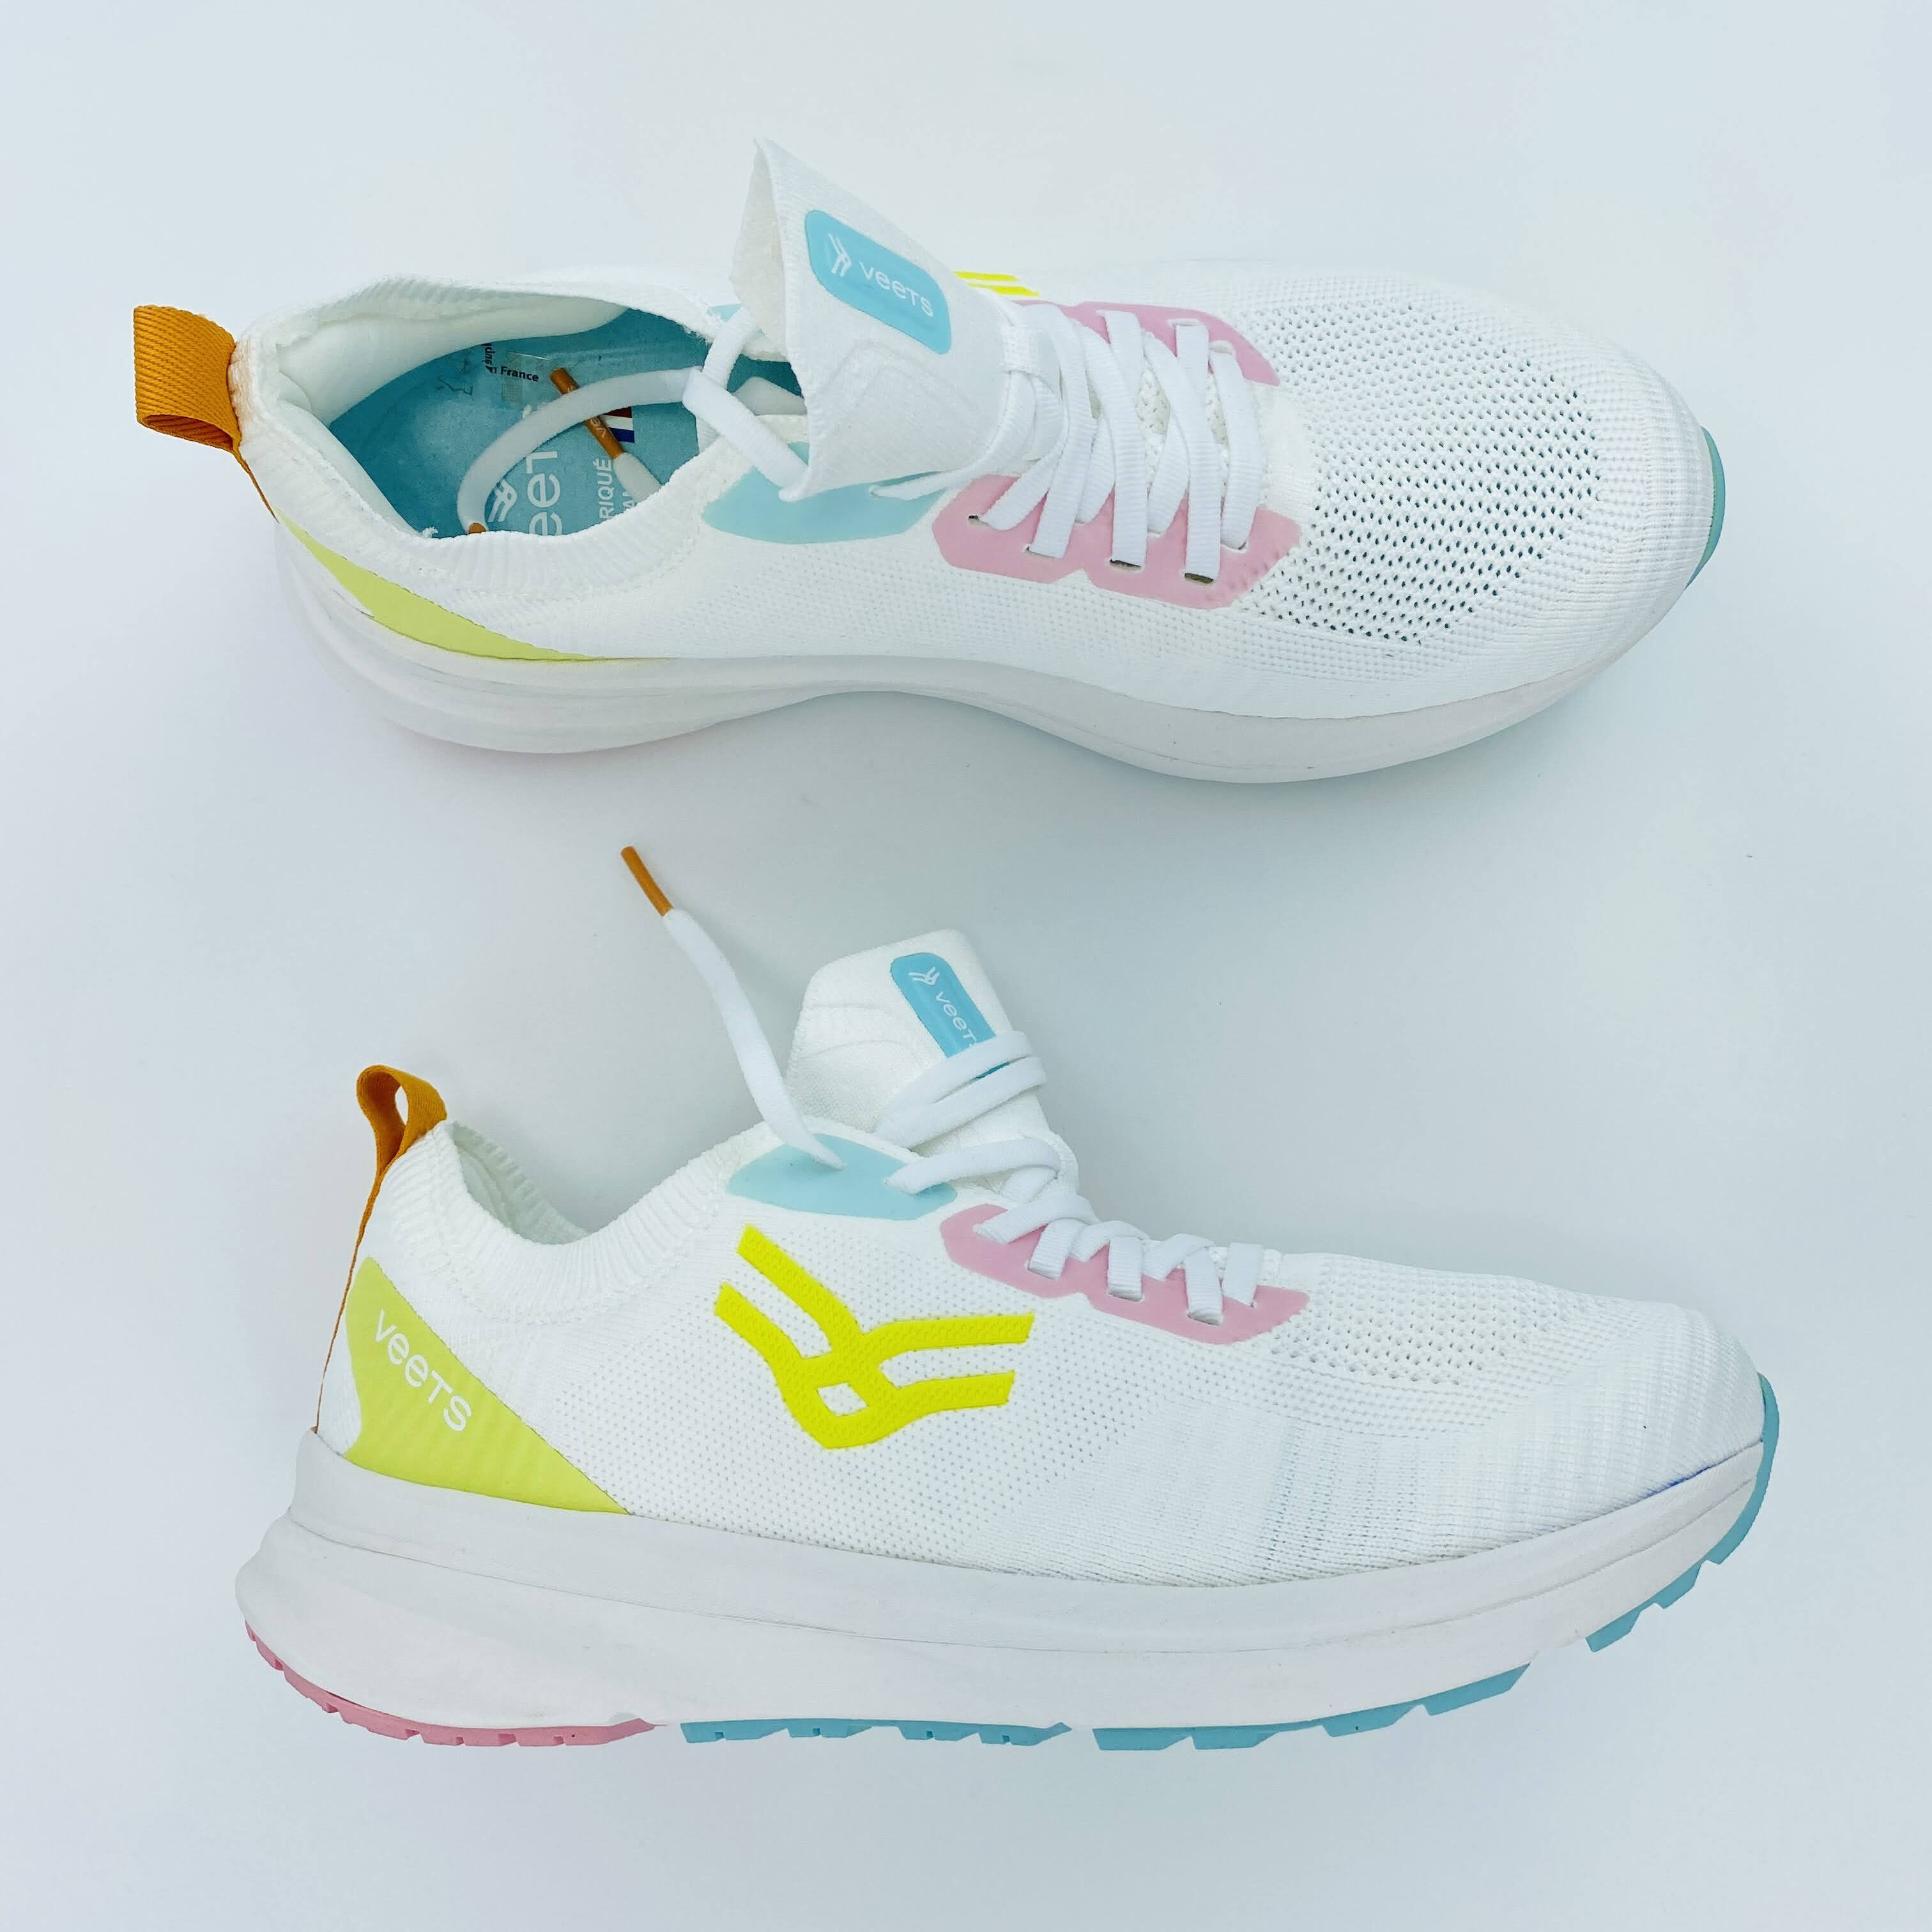 Veets W Transition Knit MIF1 - Seconde main Chaussures running femme - Blanc - 40.5 | Hardloop